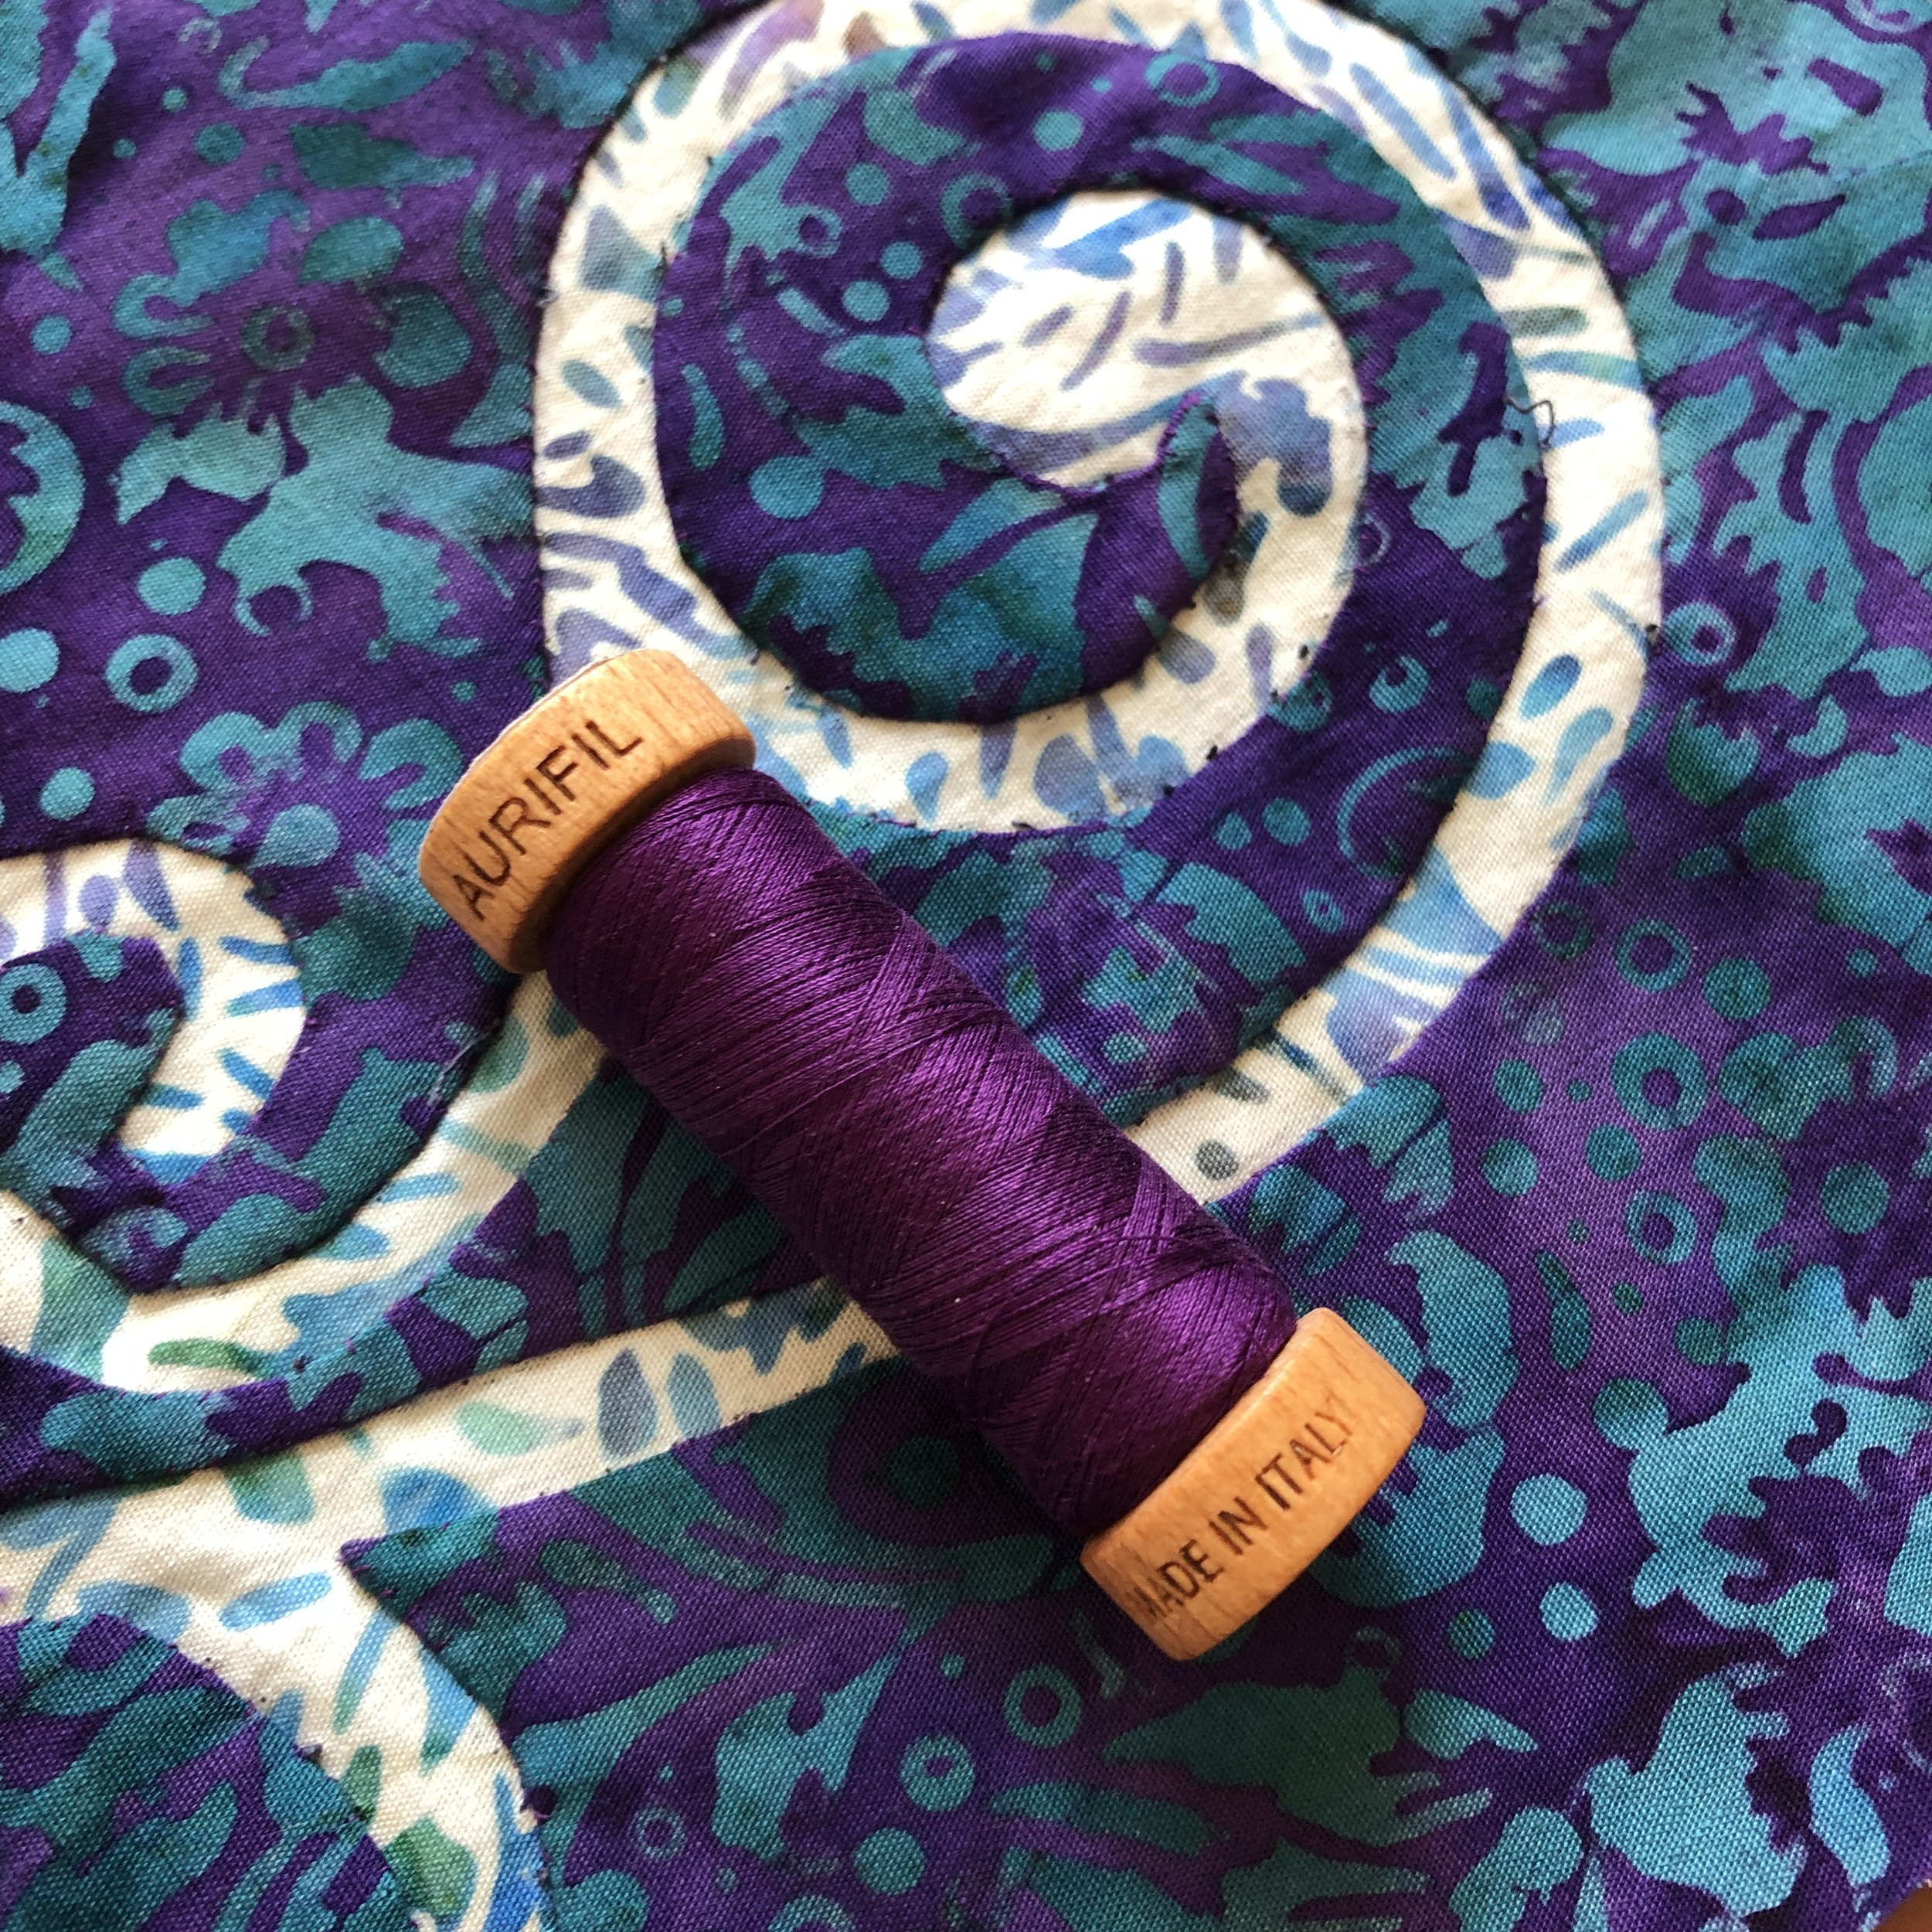 AURIFIL 80 Wt. THREAD for Hand Stitching! — Eye of the Beholder